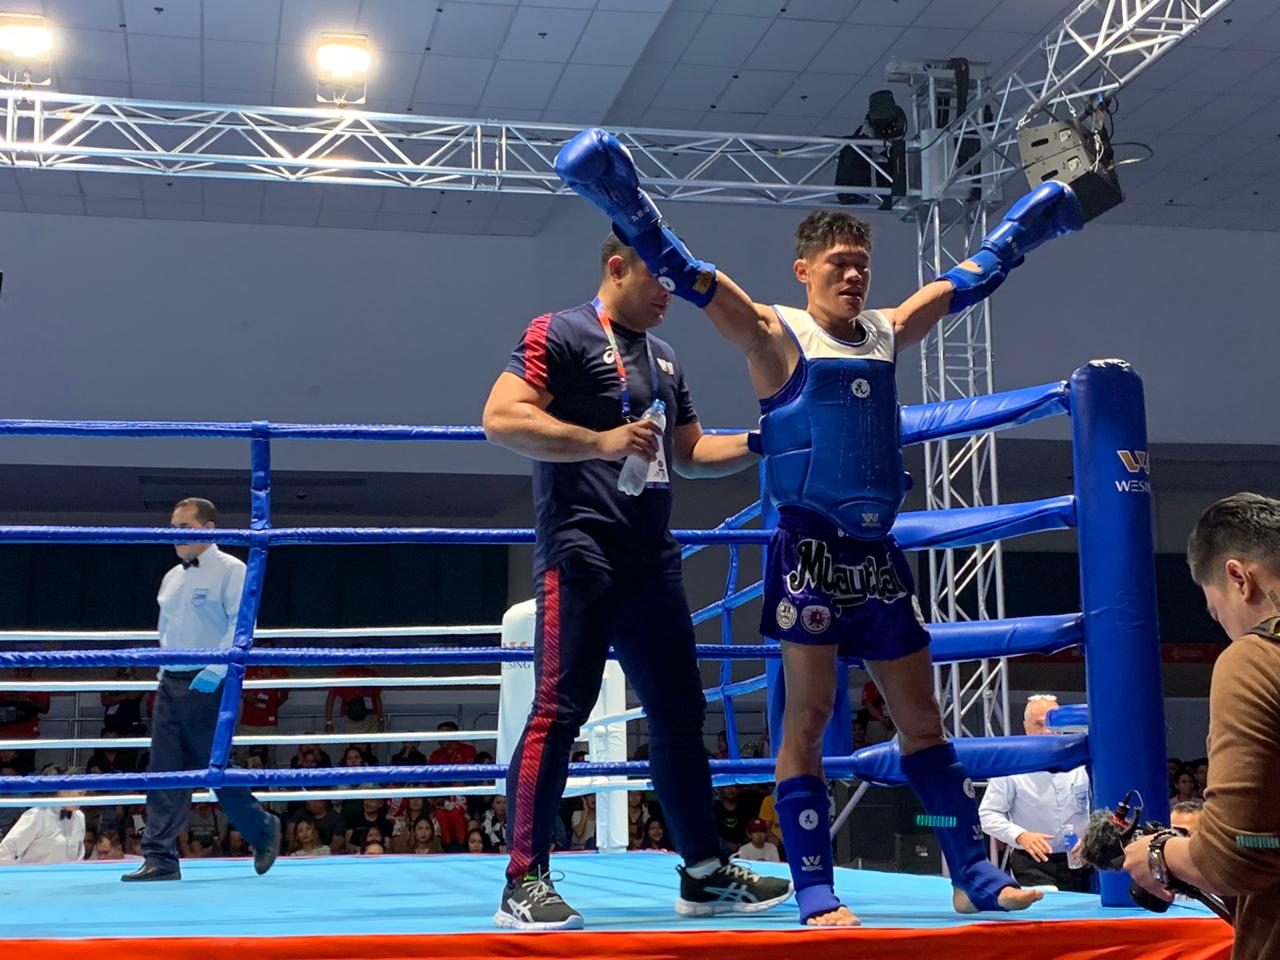 Phillip Delarmino wins gold in the muay 57kg division in the 30th Southeast Asian Games.